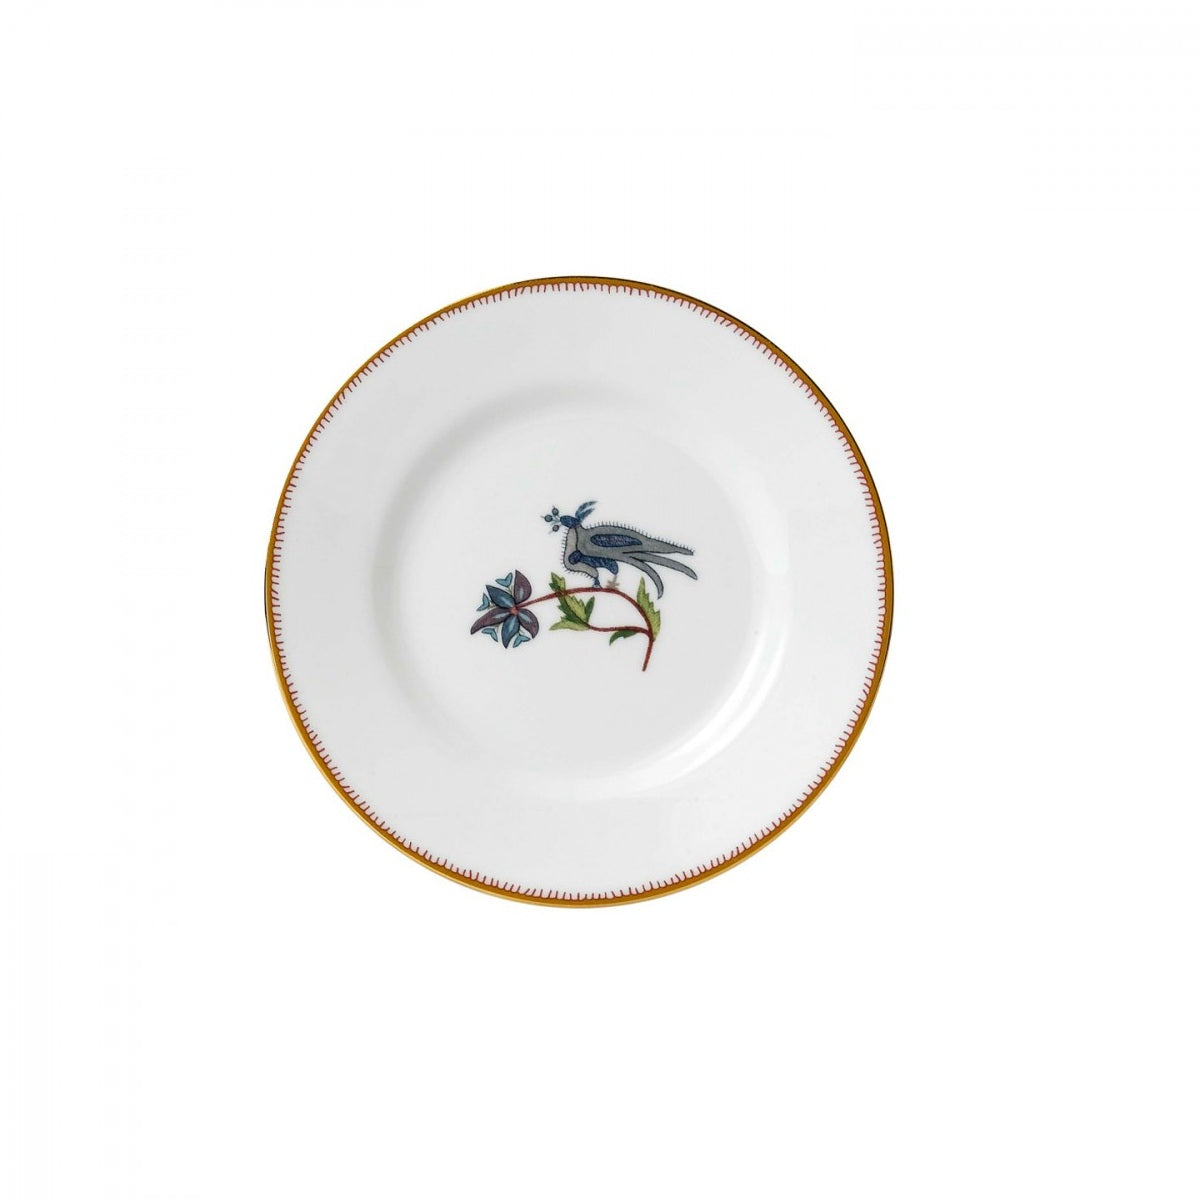 Wedgwood Kit Kemp Mythical Creatures Plate 6 Inch